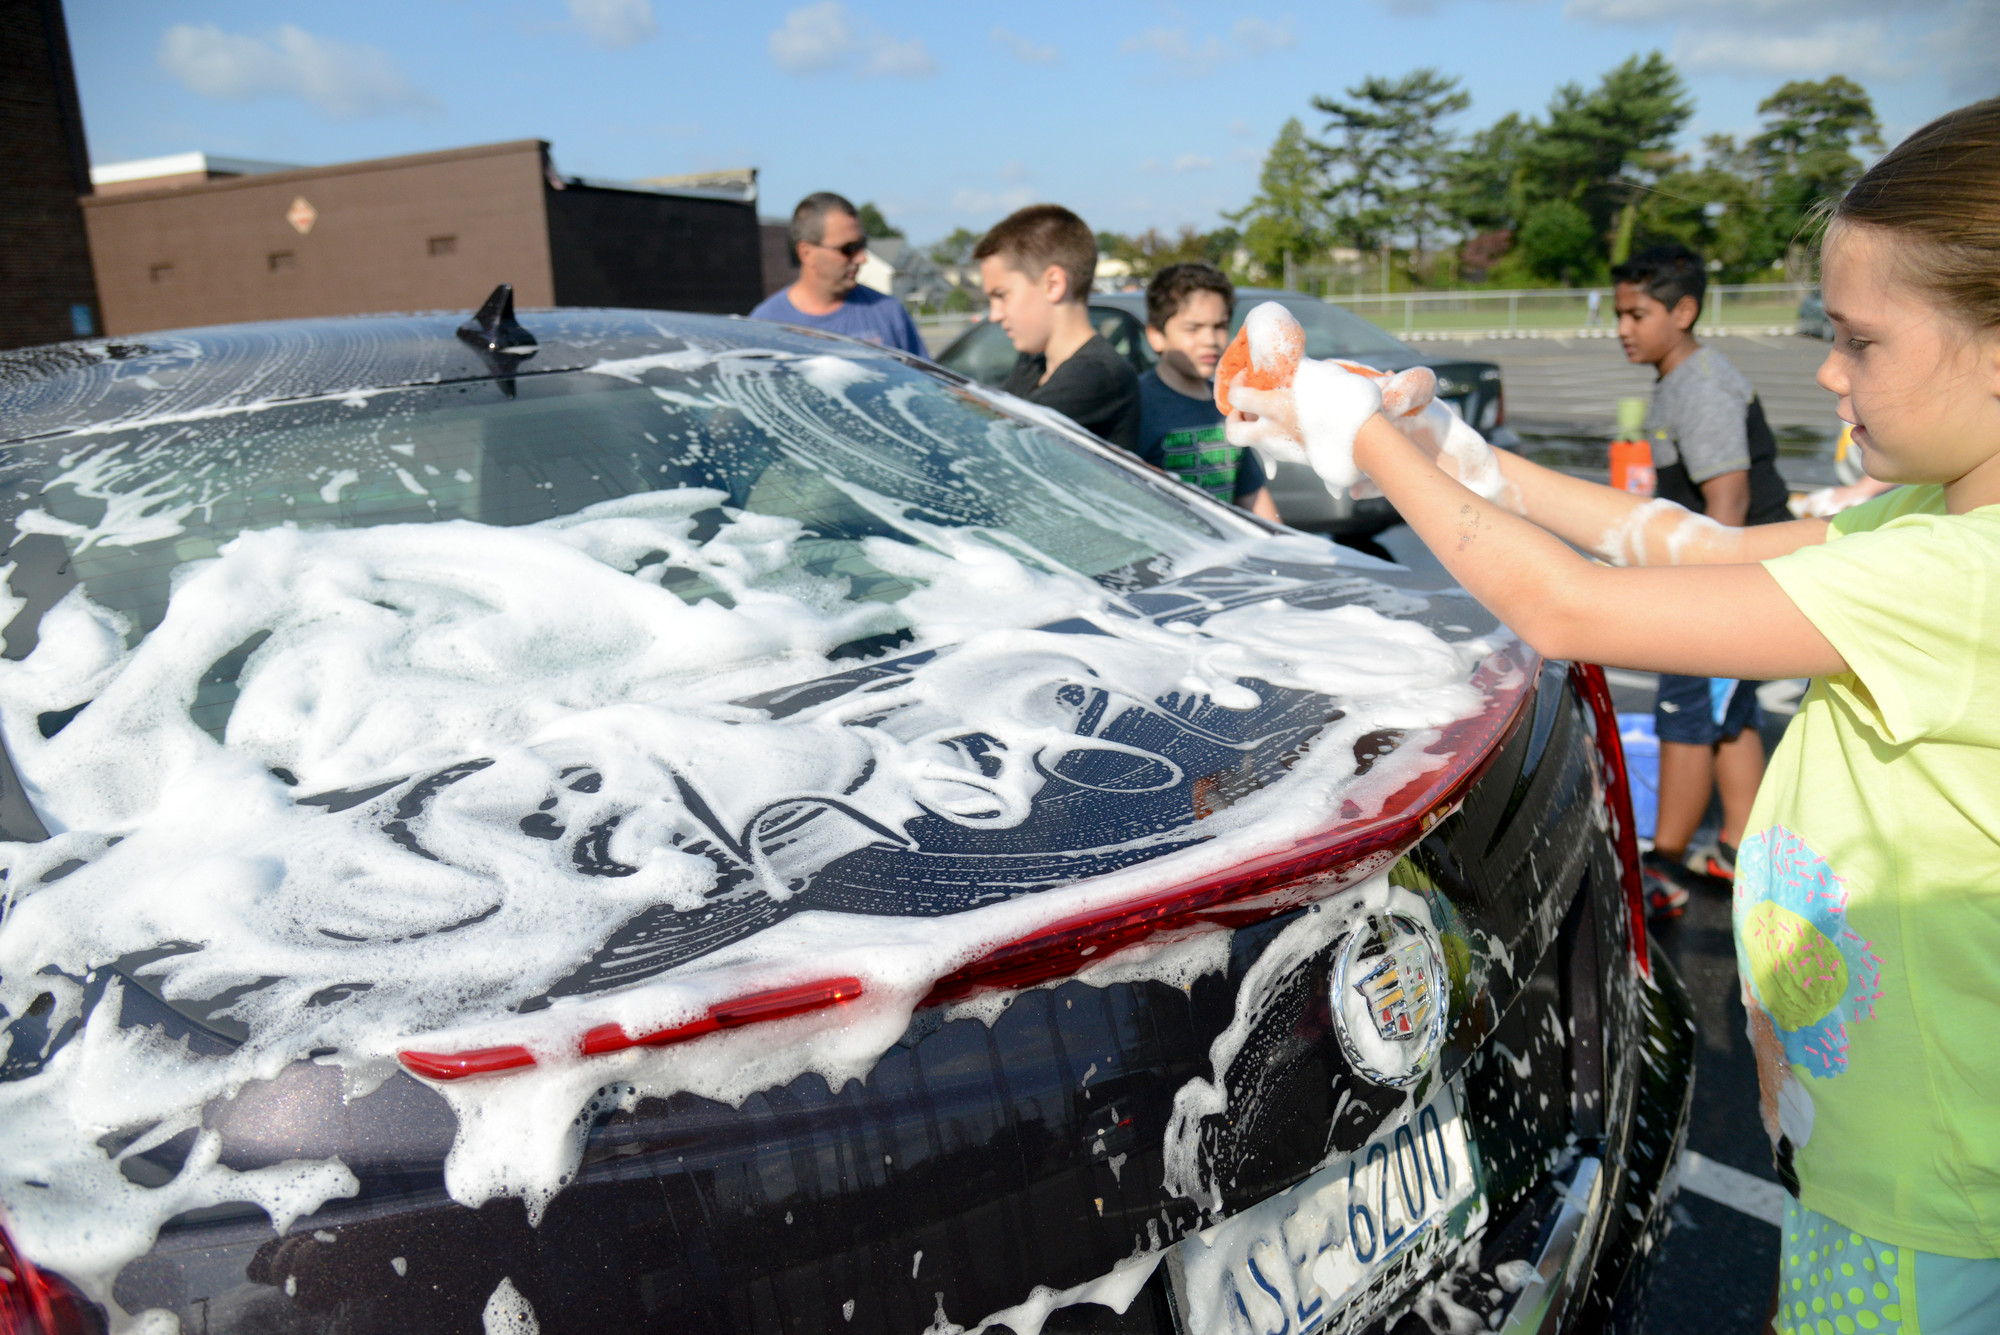 Jenna Cozier washed the first car—but not before writing a message in the suds— at the School No. 5 car wash.